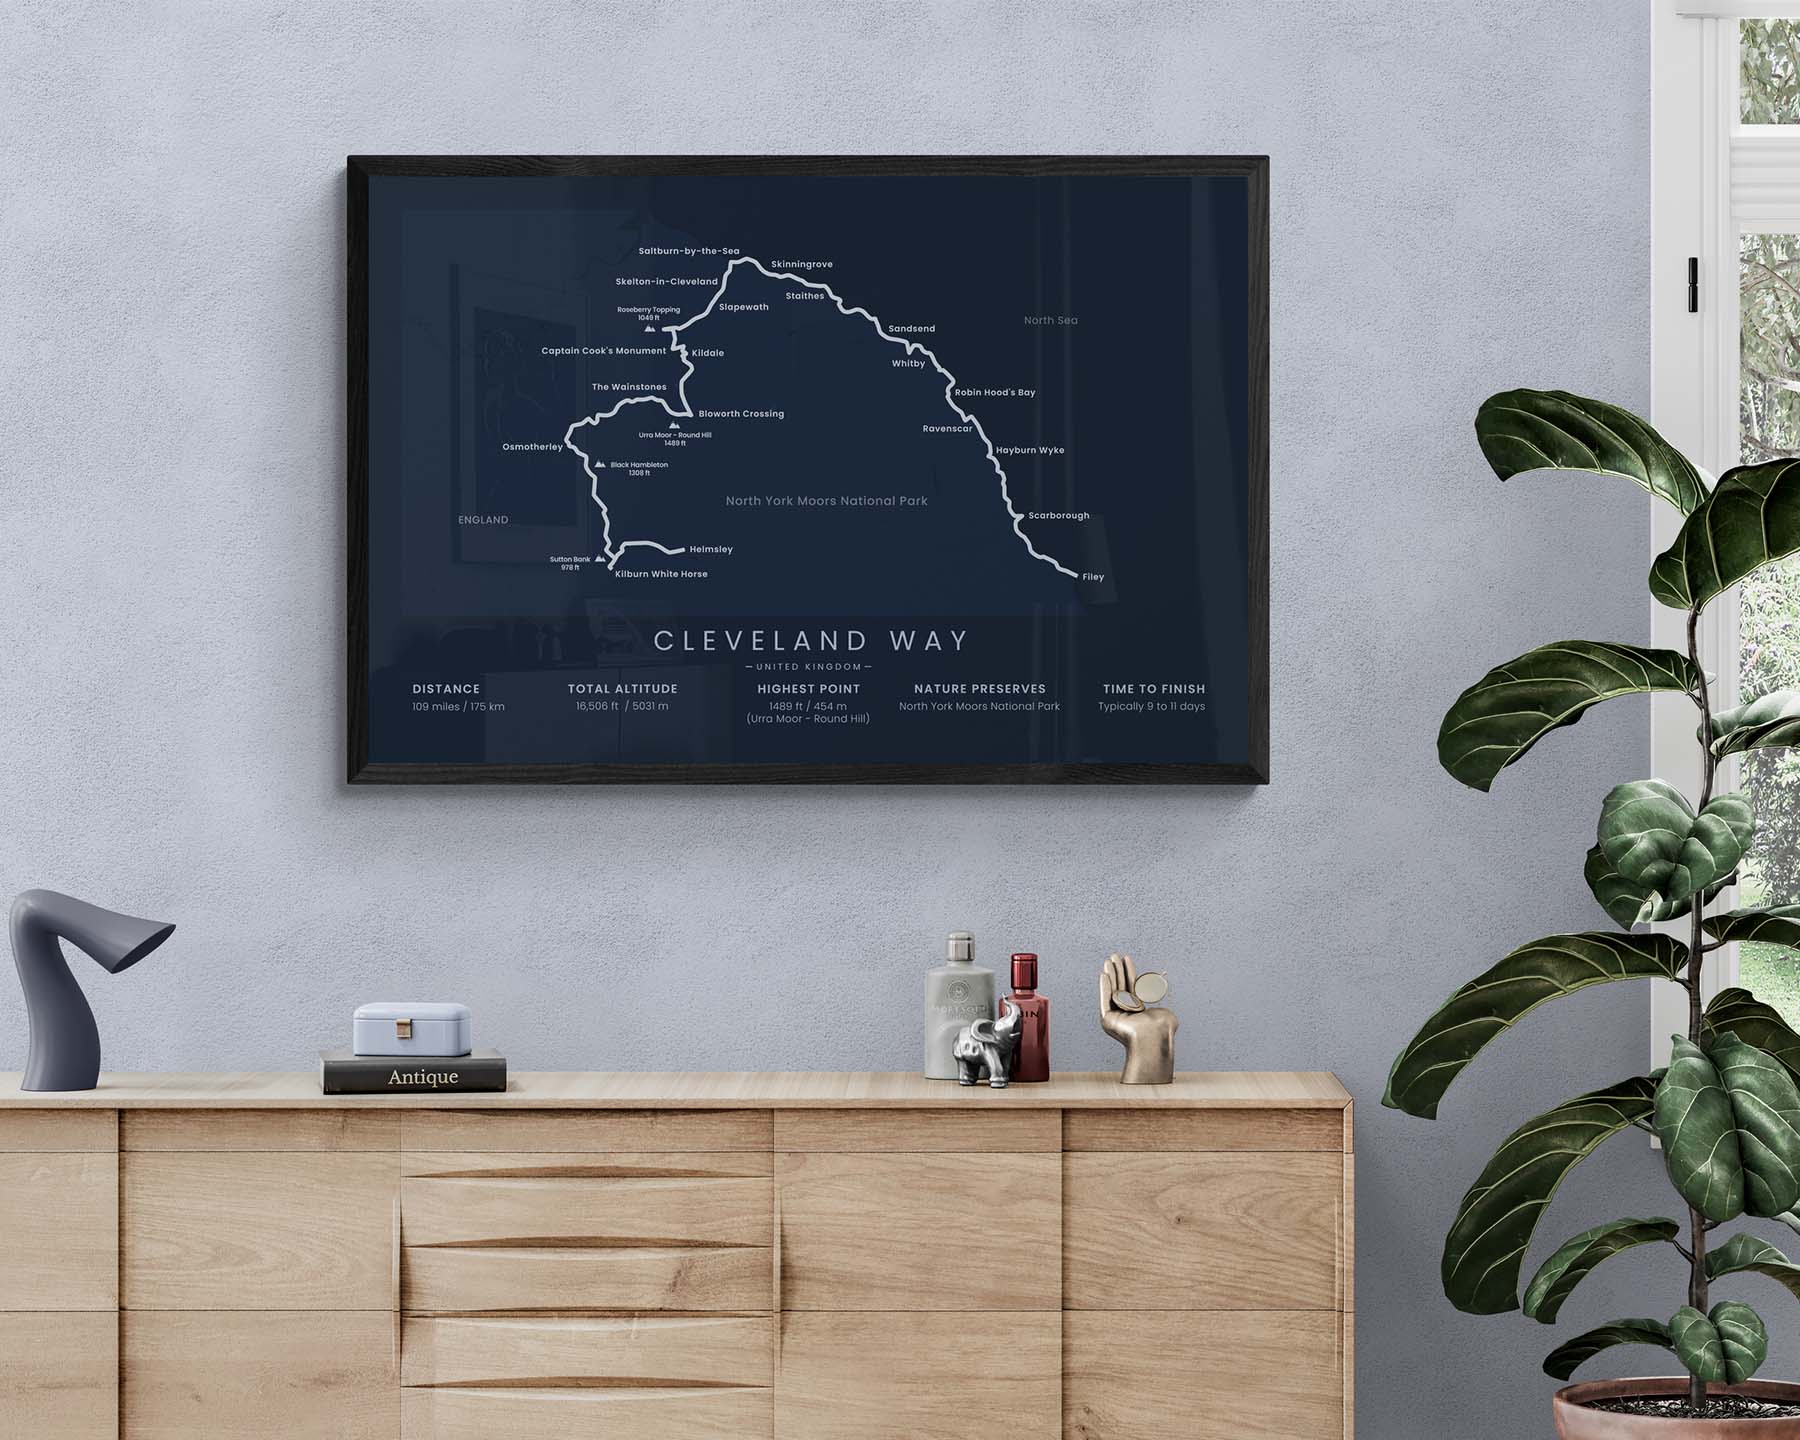 Cleveland Way (Filey to Helmsley, North Yorkshire) Hike Map Art in Minimal Interior Decor